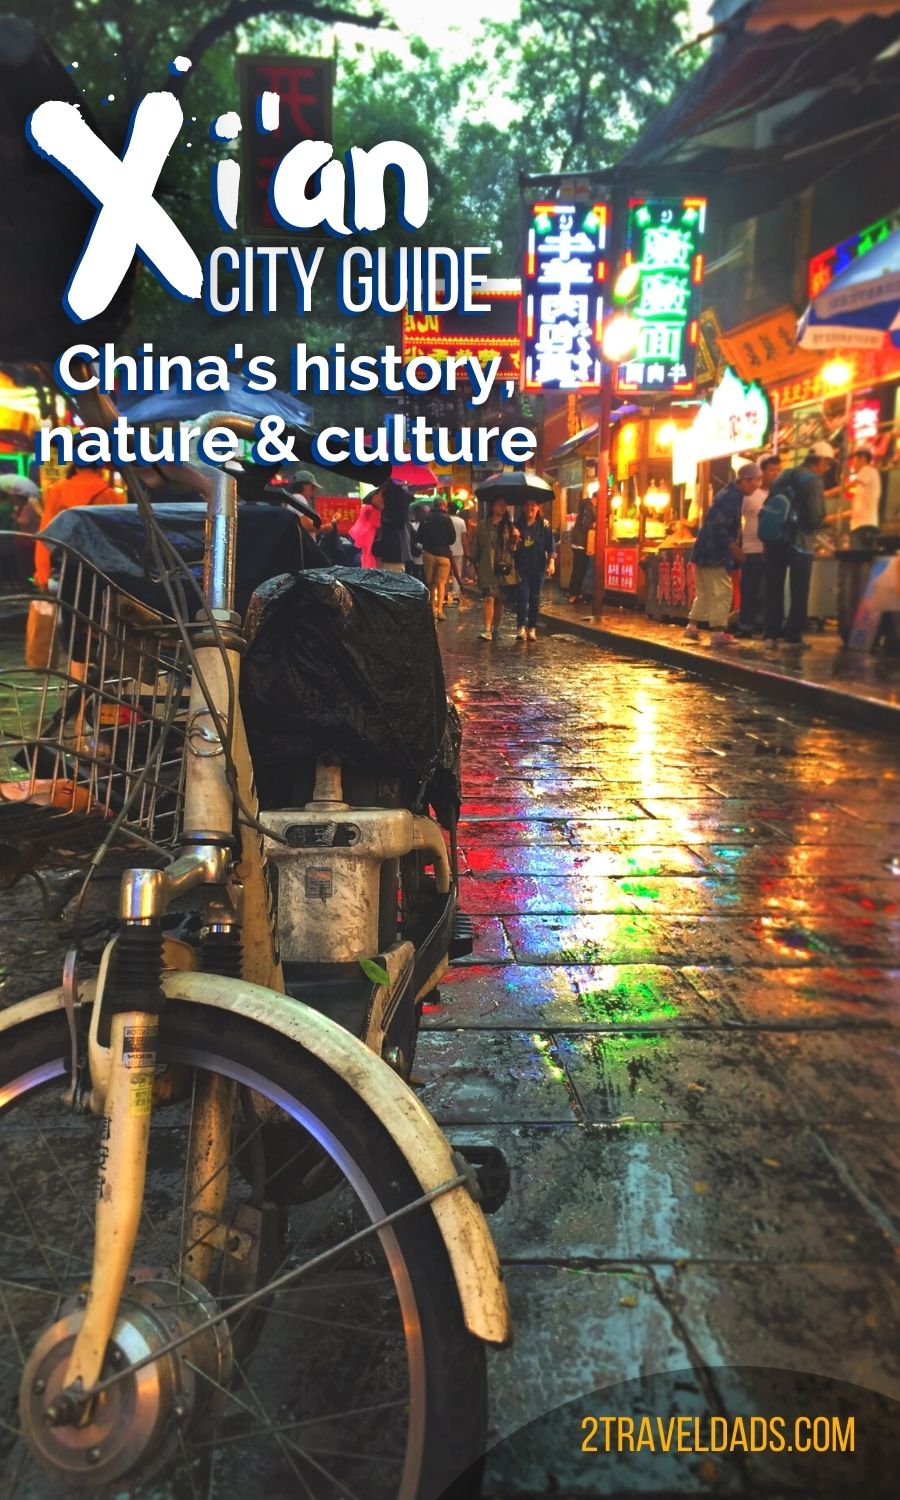 Xi'an city guide: how to experience China's first capitol with history, nature and culture. From museums to national parks, itinerary and travel tips for Xi'an. 2traveldads.com